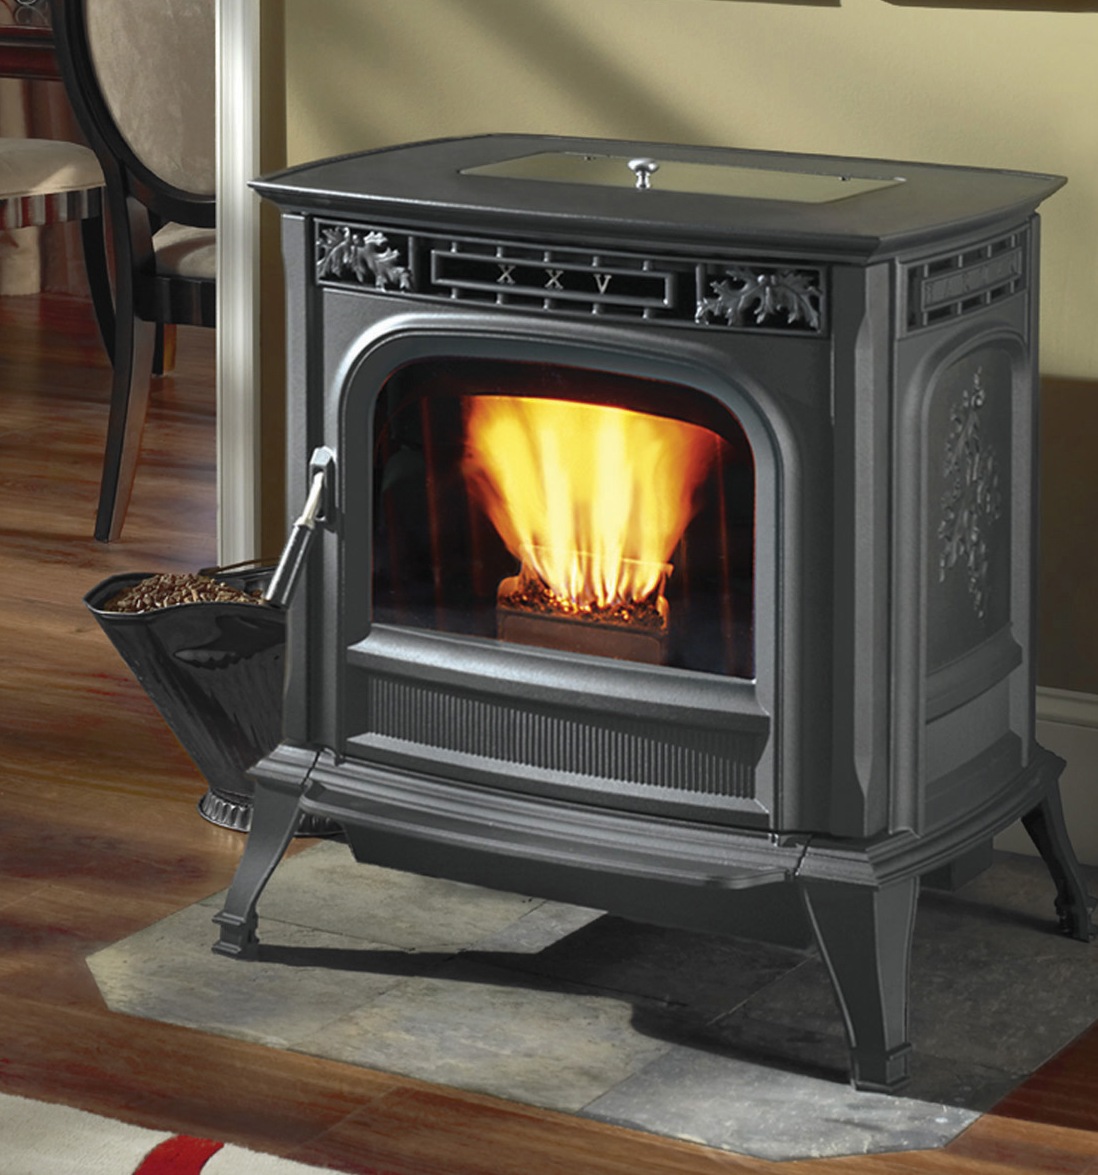 Midtown Chimney Sweeps is the preferred contractor for pellet stove maintenance and cleaning